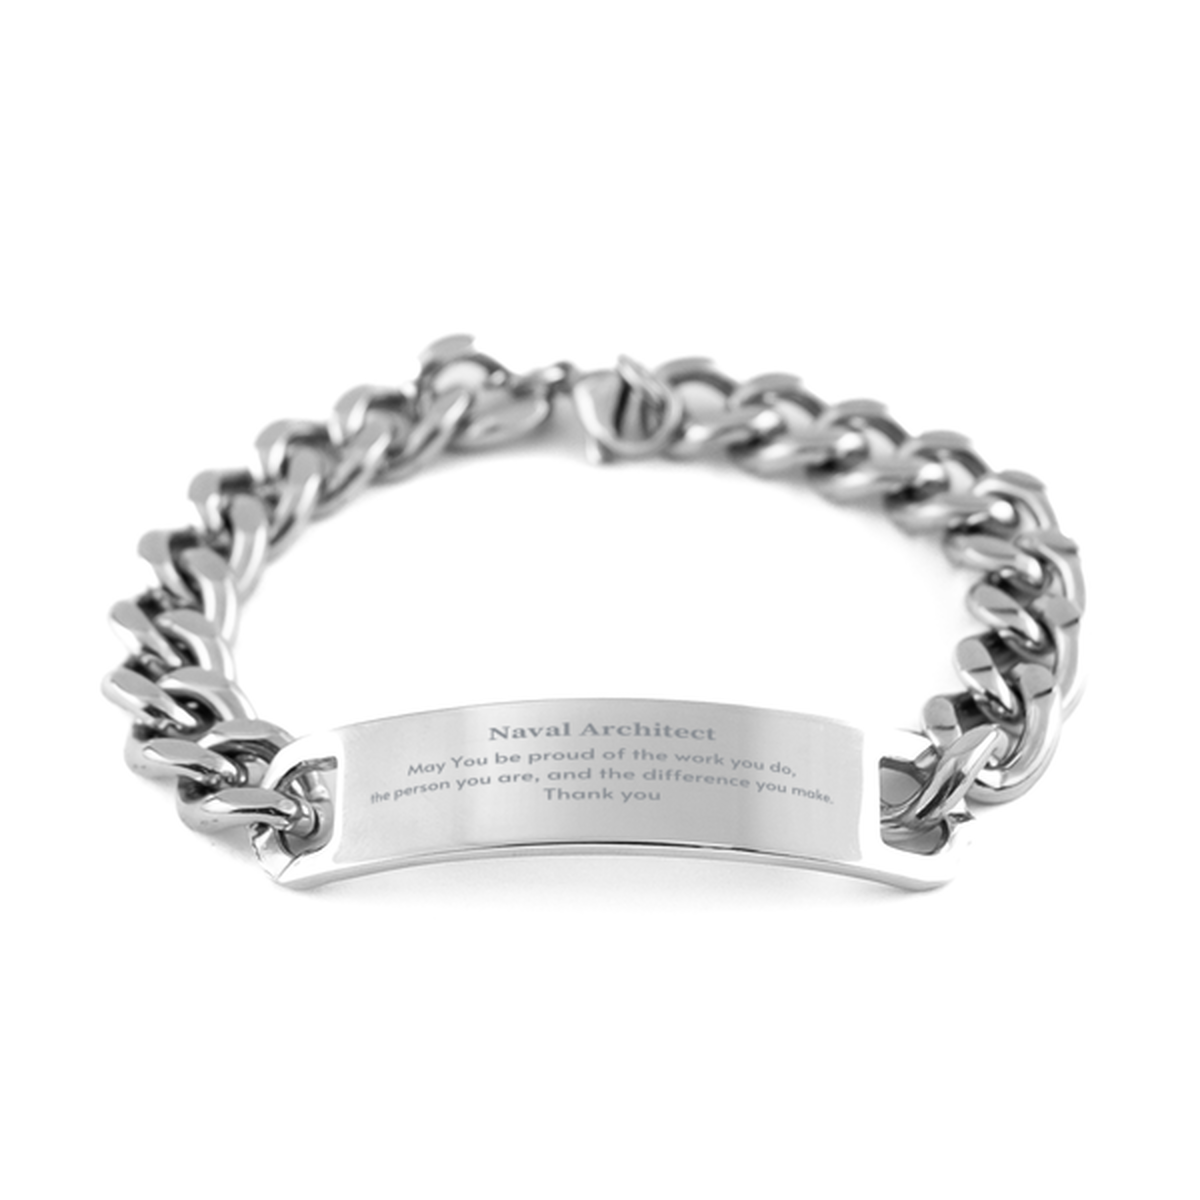 Heartwarming Cuban Chain Stainless Steel Bracelet Retirement Coworkers Gifts for Naval Architect, Naval Architect May You be proud of the work you do, the person you are Gifts for Boss Men Women Friends